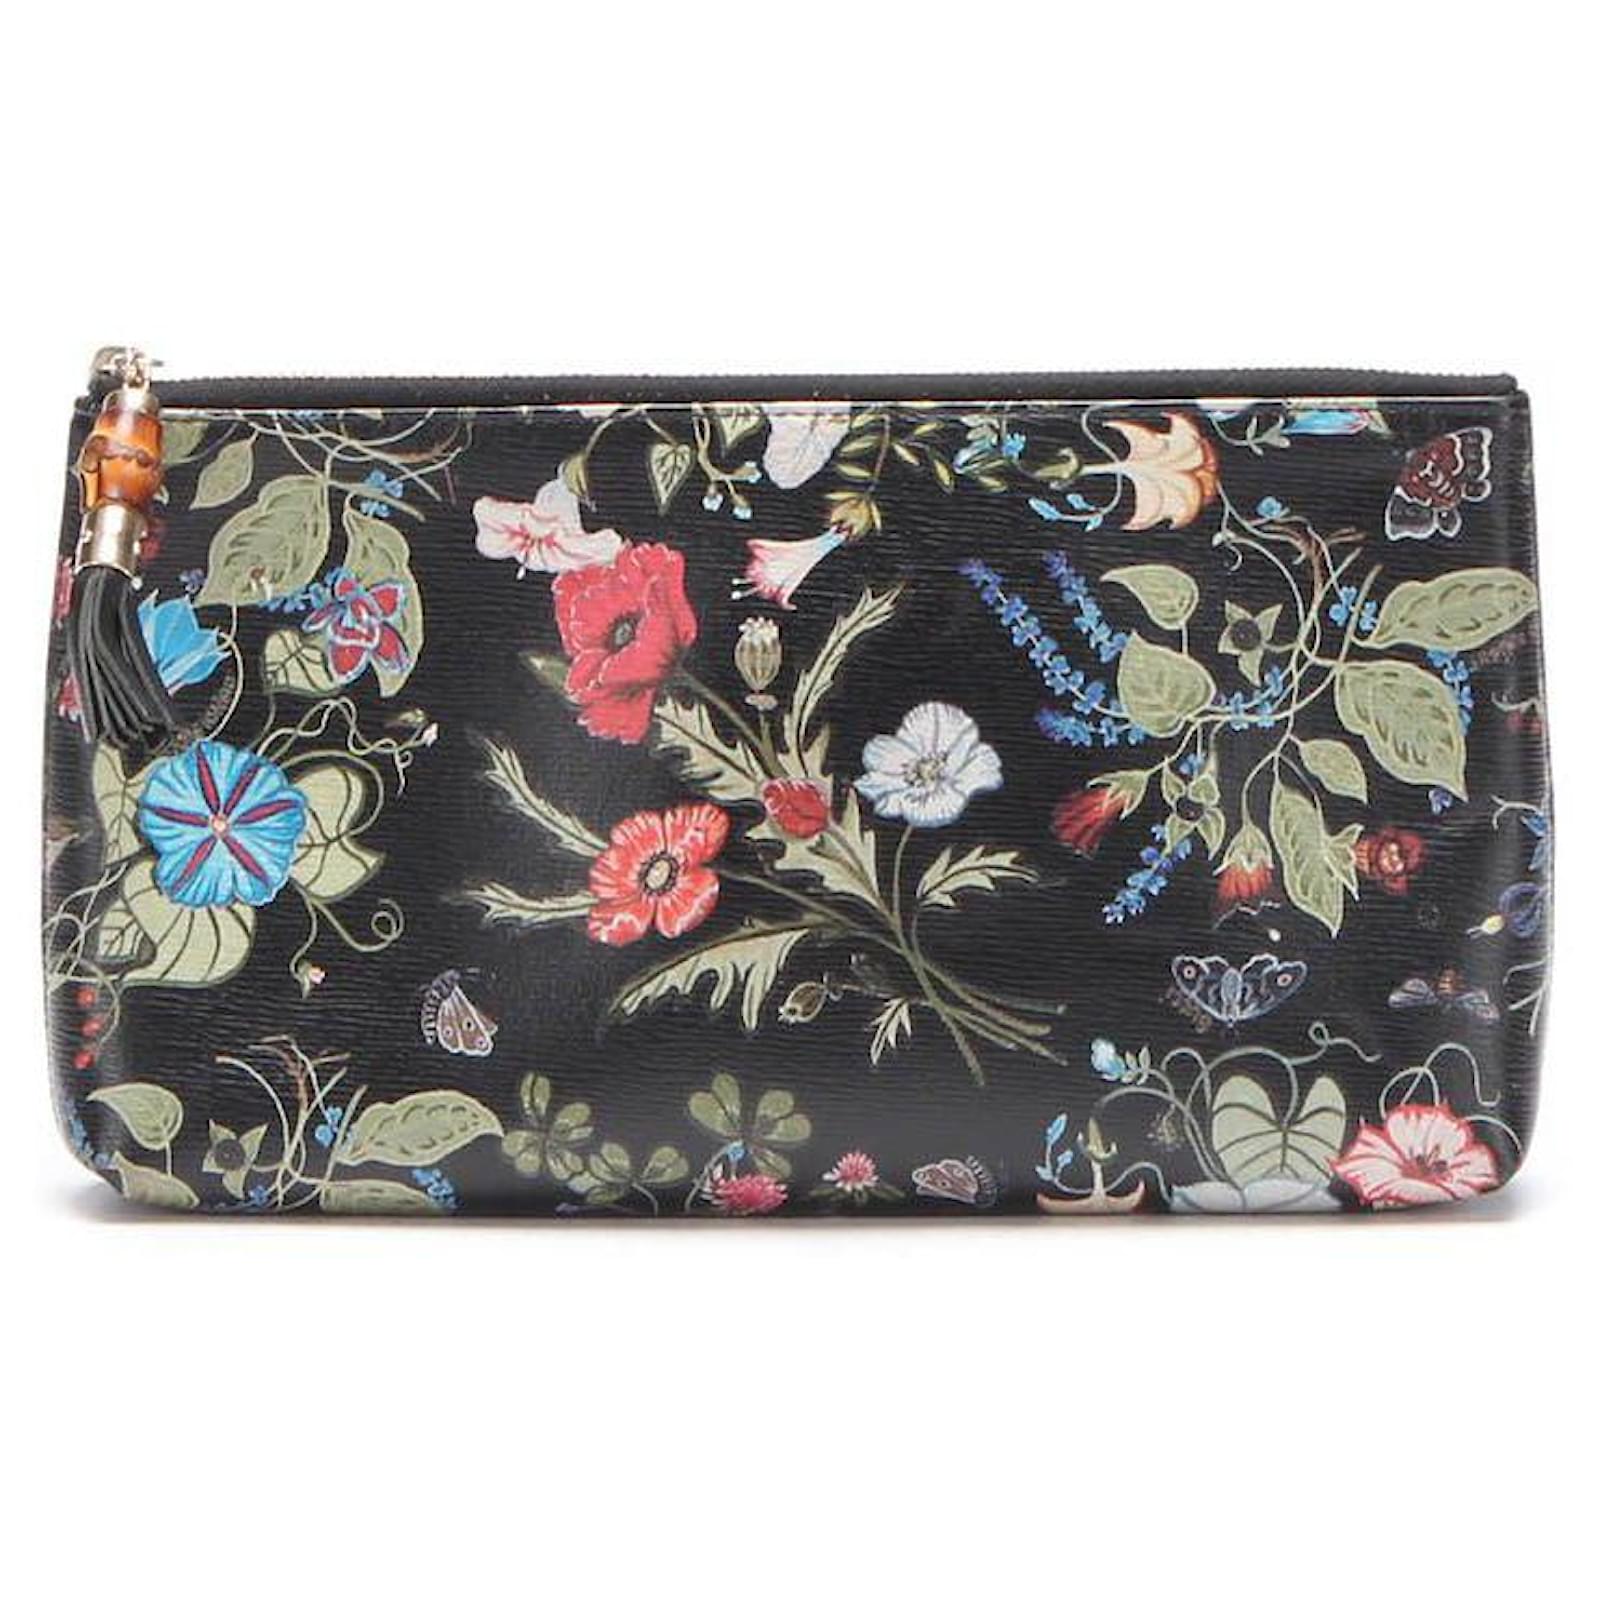 Gucci Floral Busta Grande Leather Clutch Multiple colors Pony-style ...